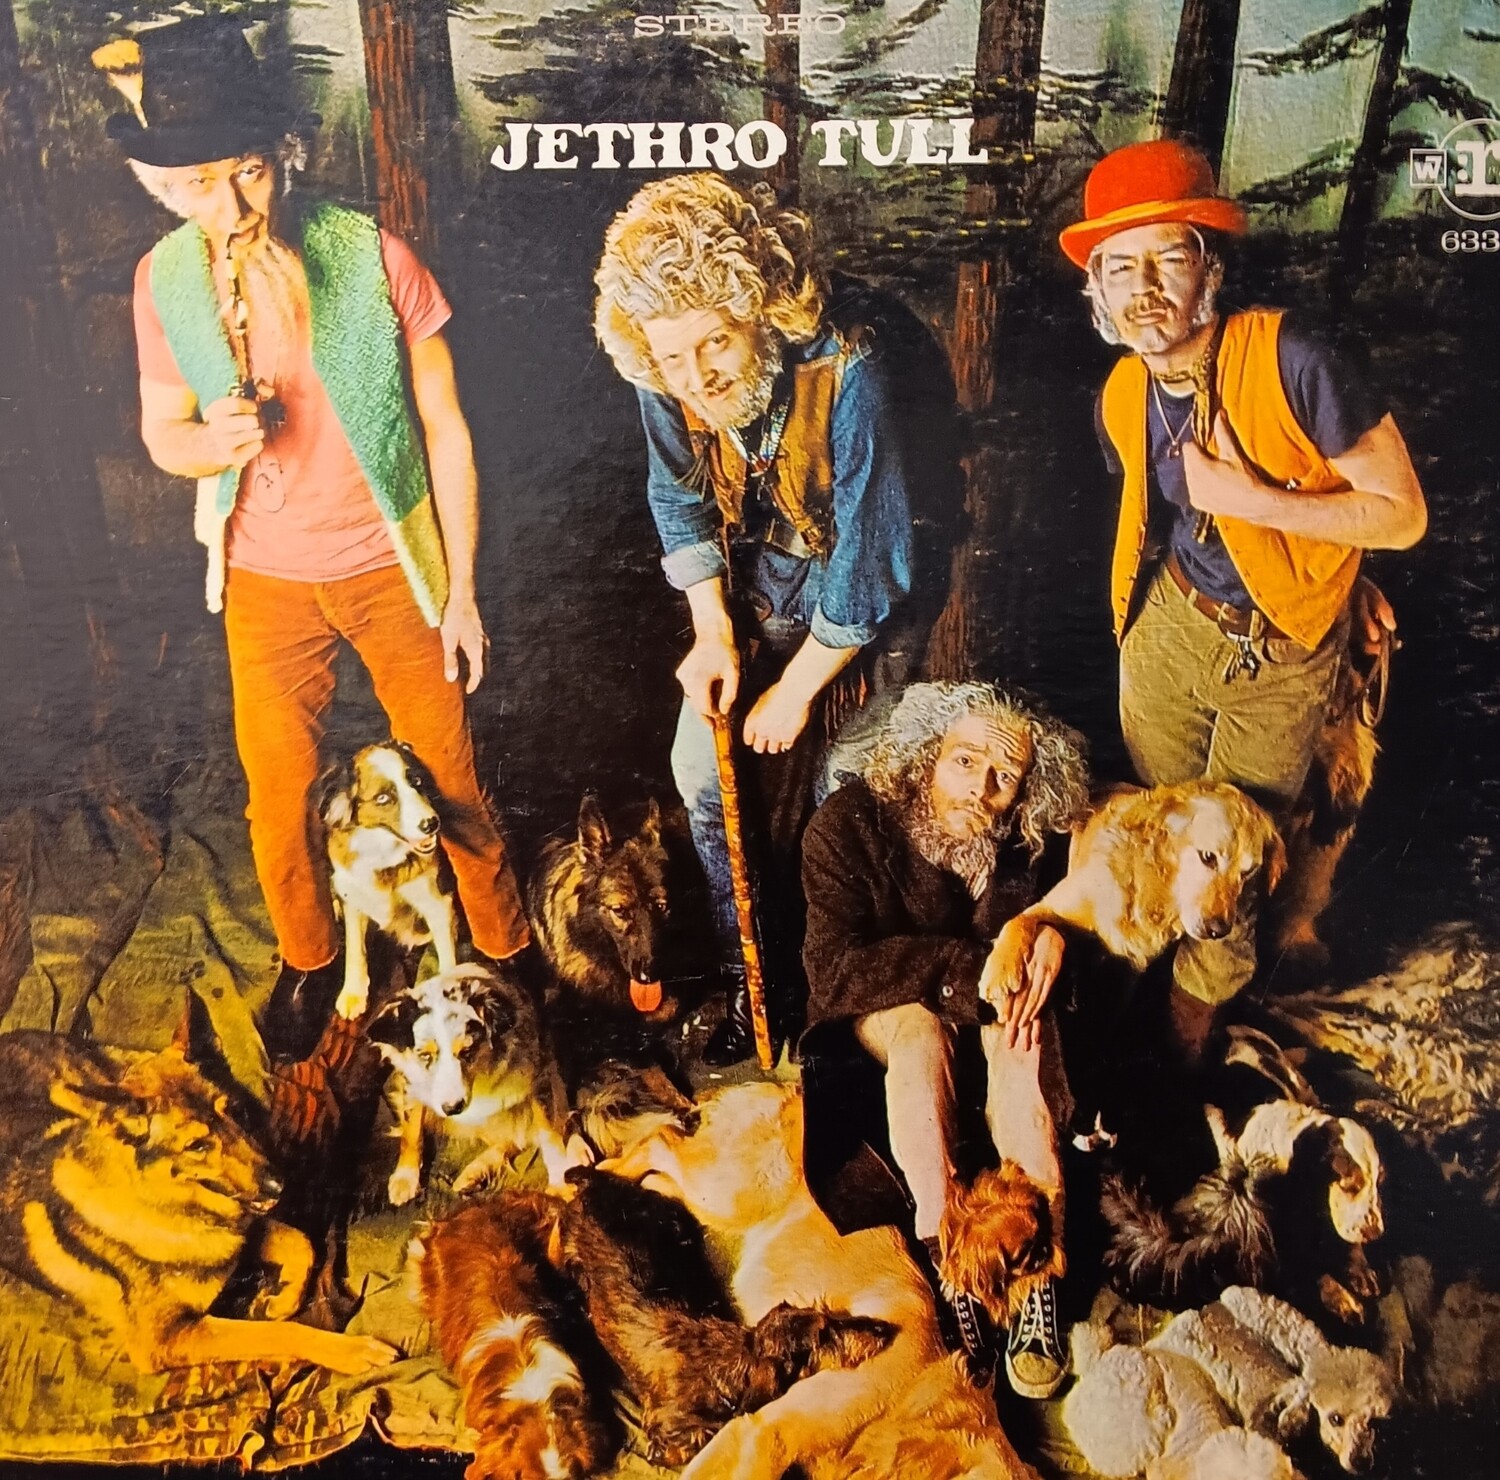 JETHRO TULL - This was